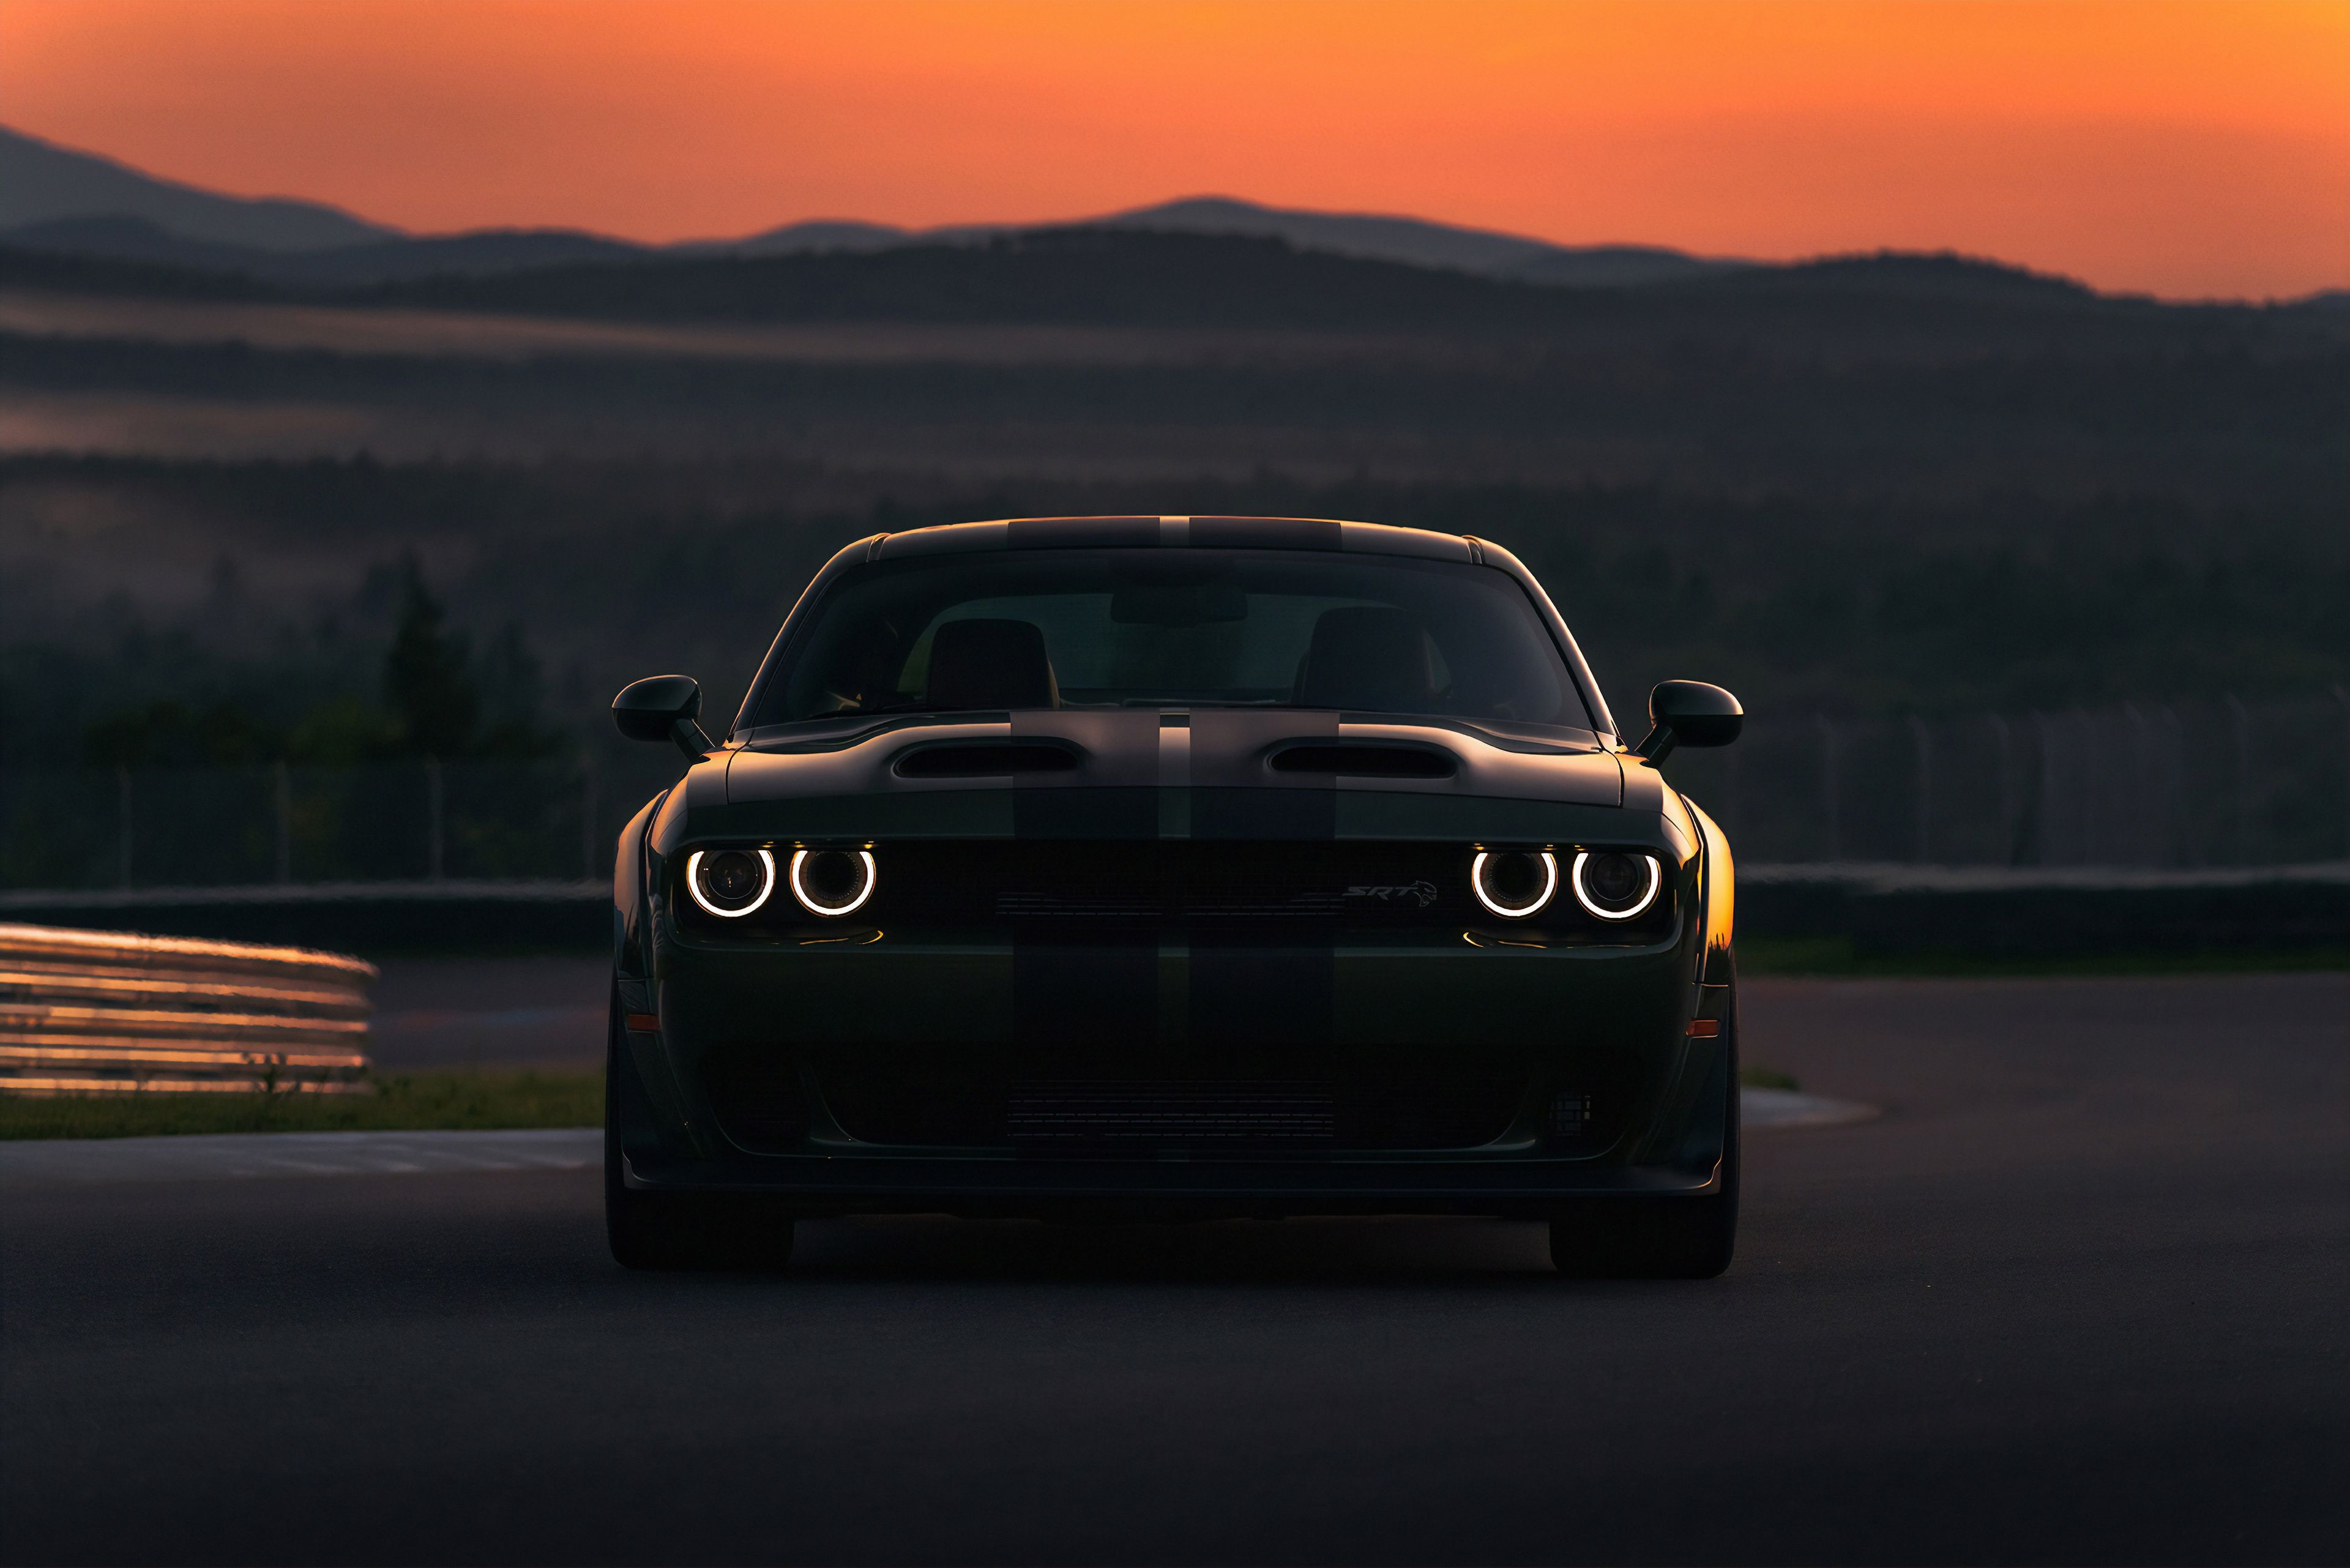 Dodge Charger Srt Hellcat Widebody Wallpapers